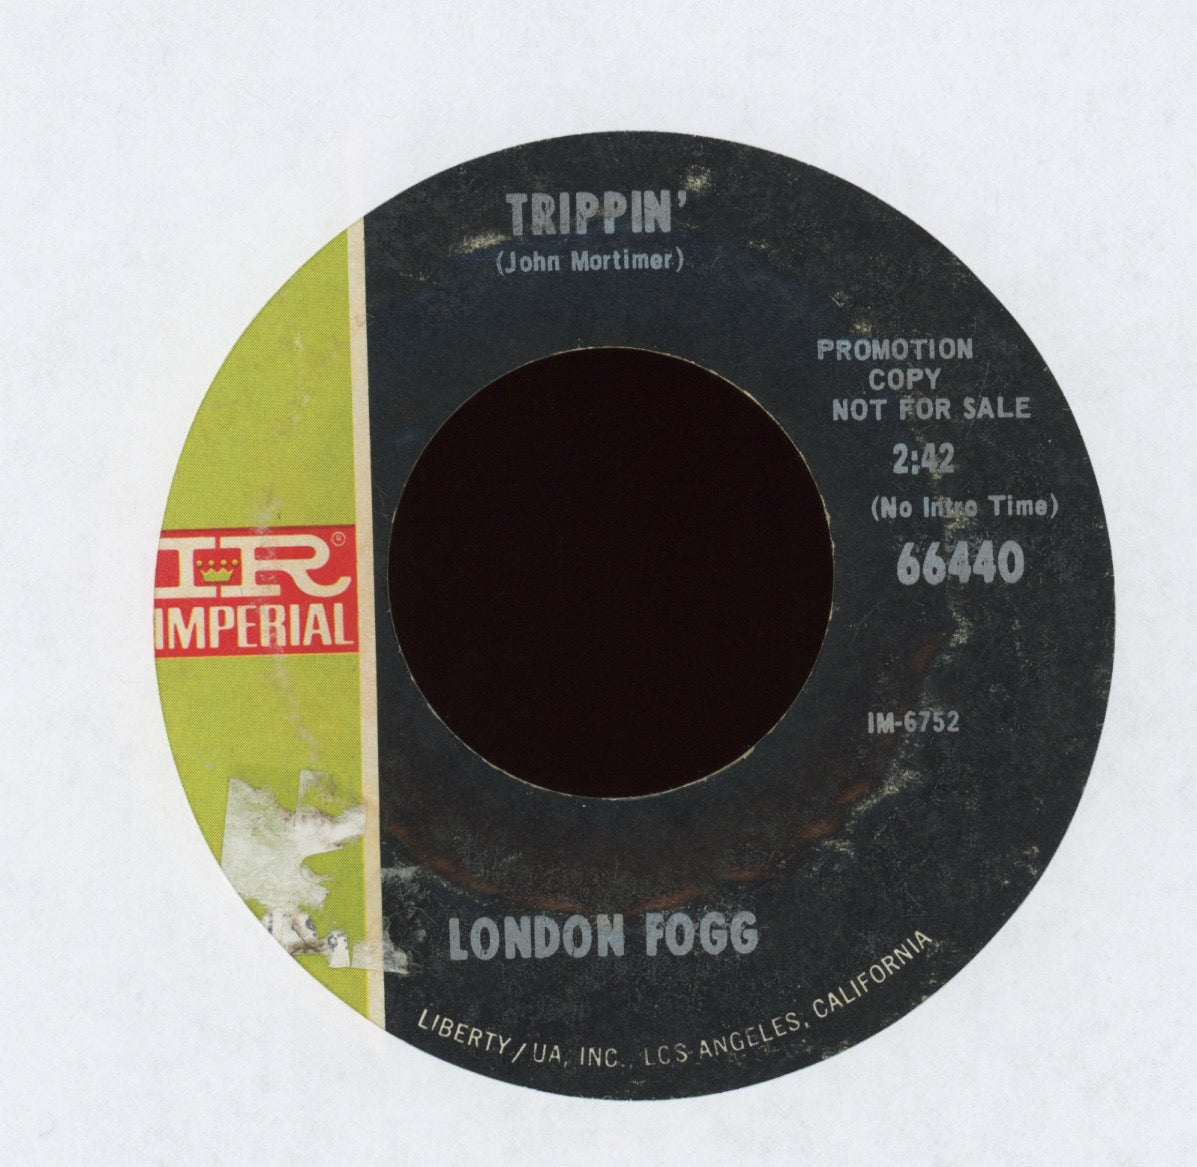 London Fog & The Continentals - Easy Mover on Imperial Promo Funk 45